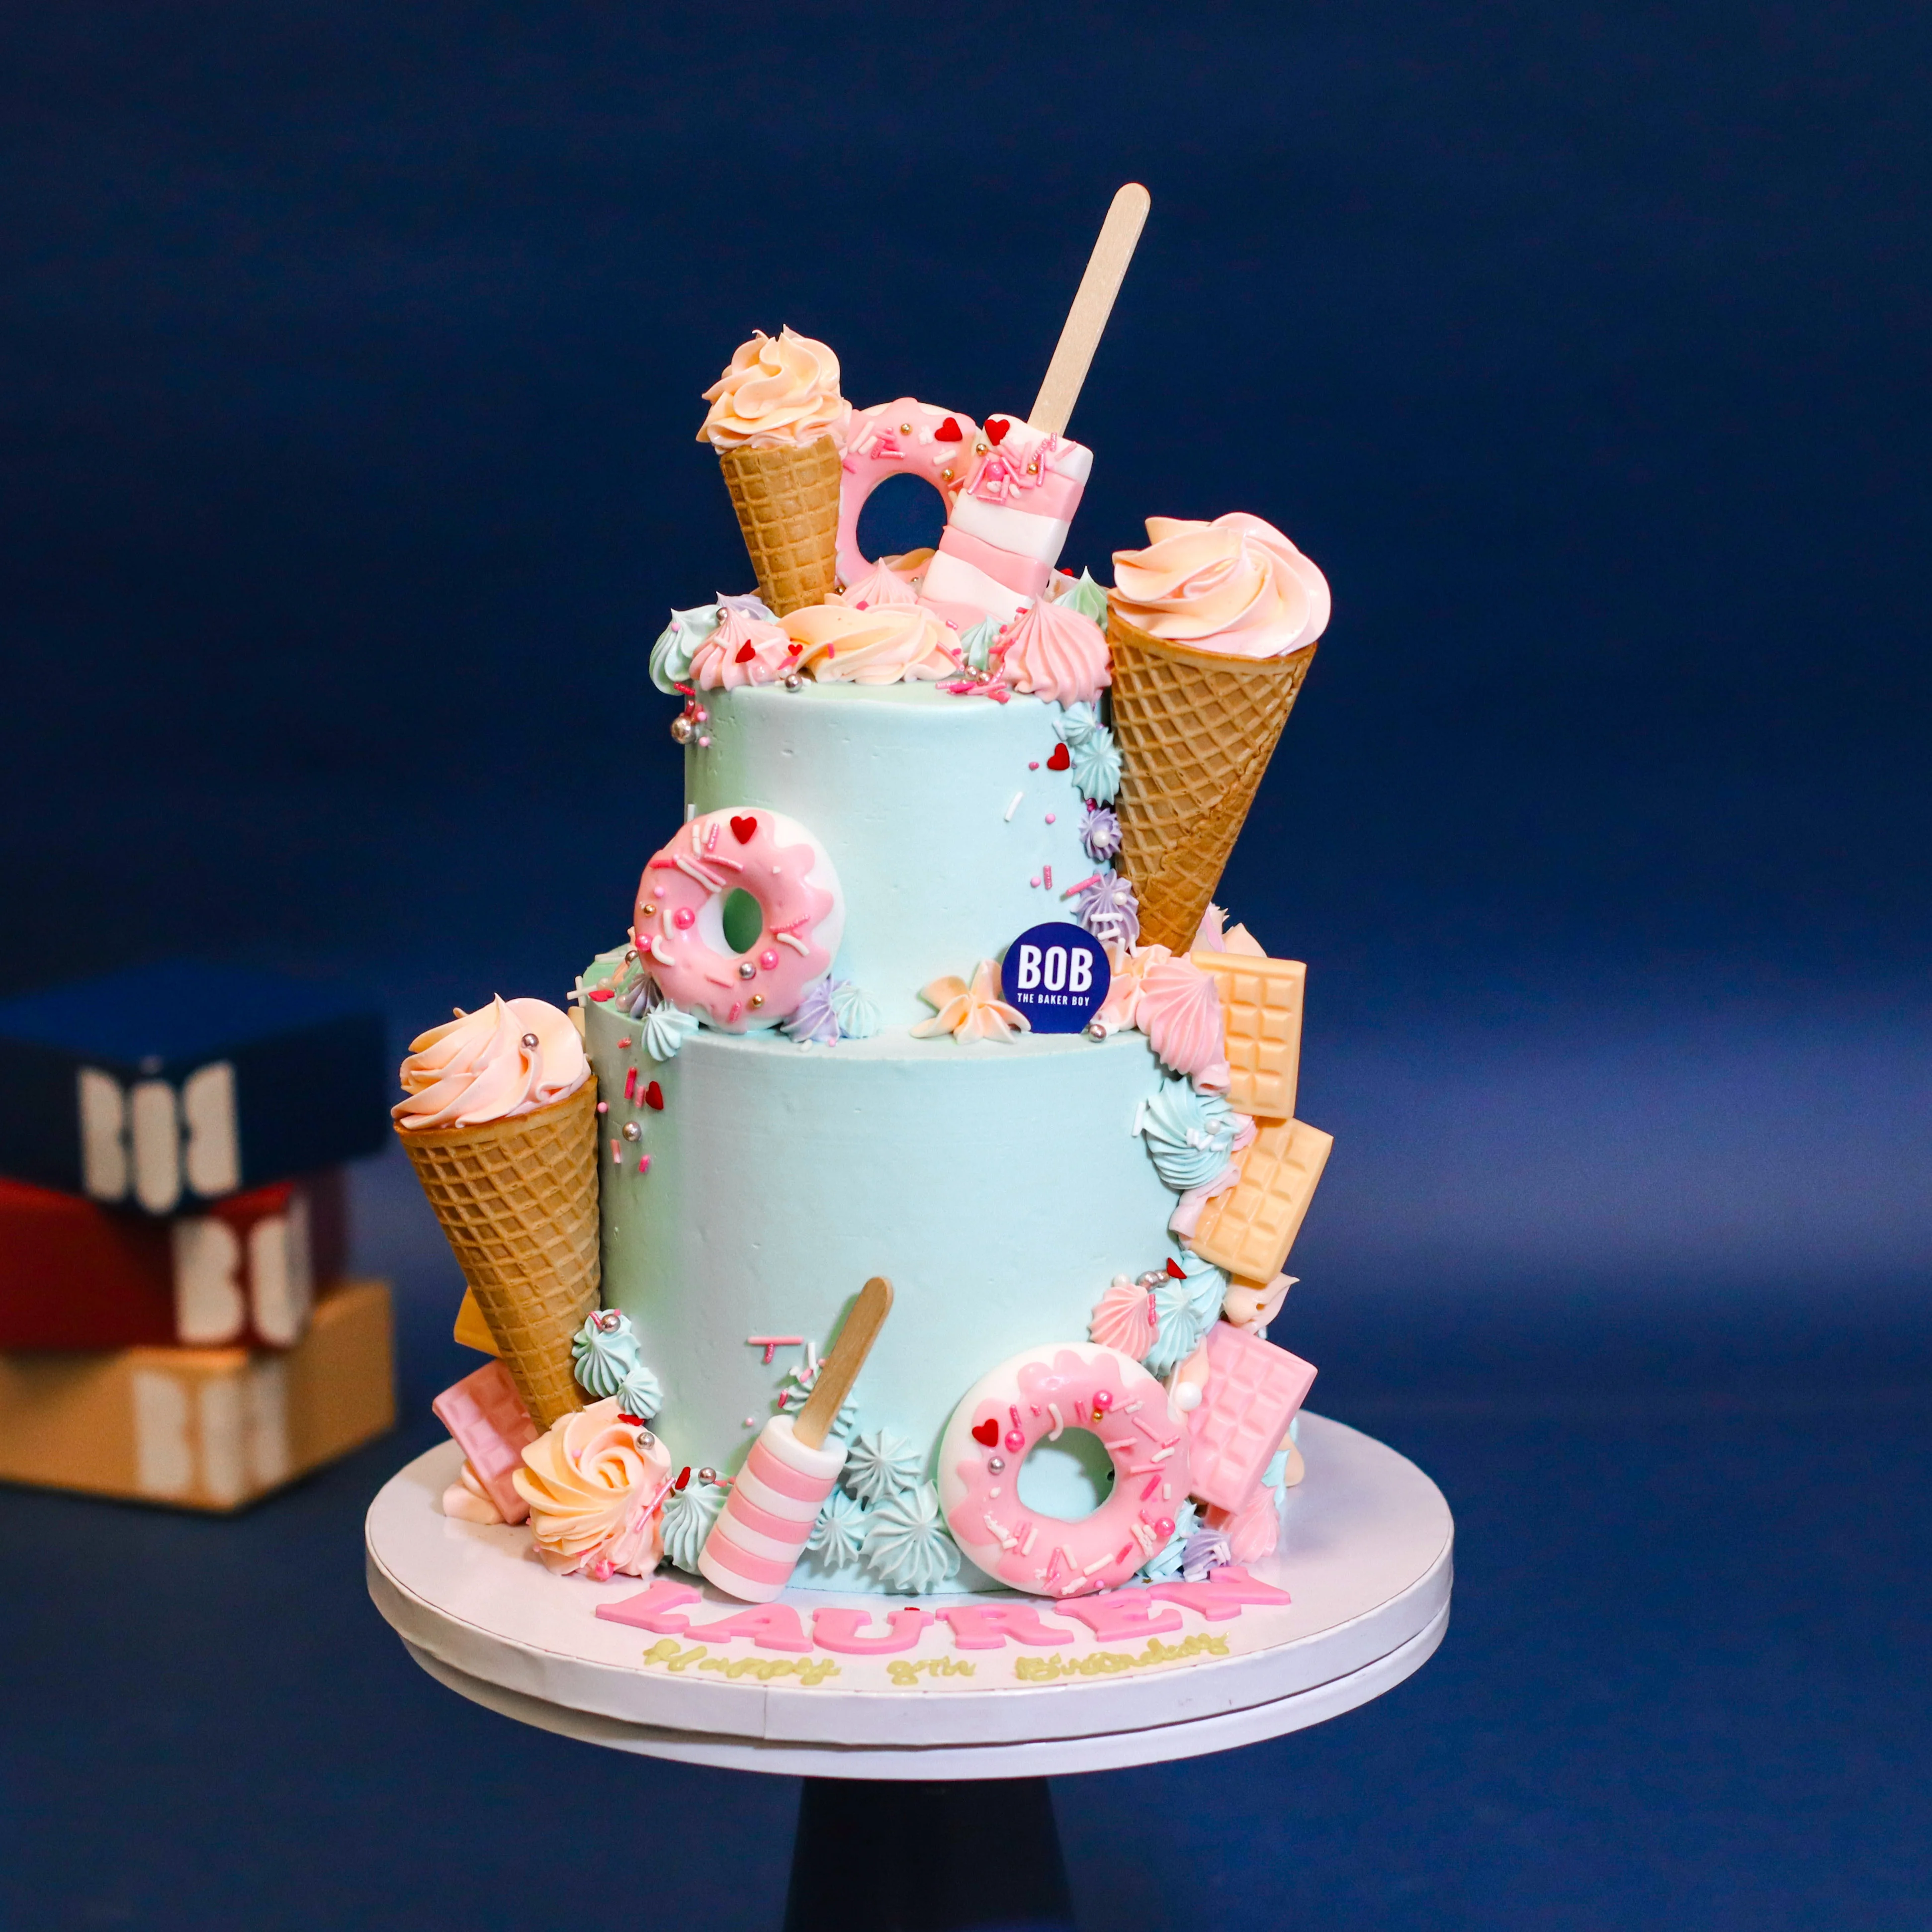 Pastel Turquoise Candyland Cake With Rainbow Lollies